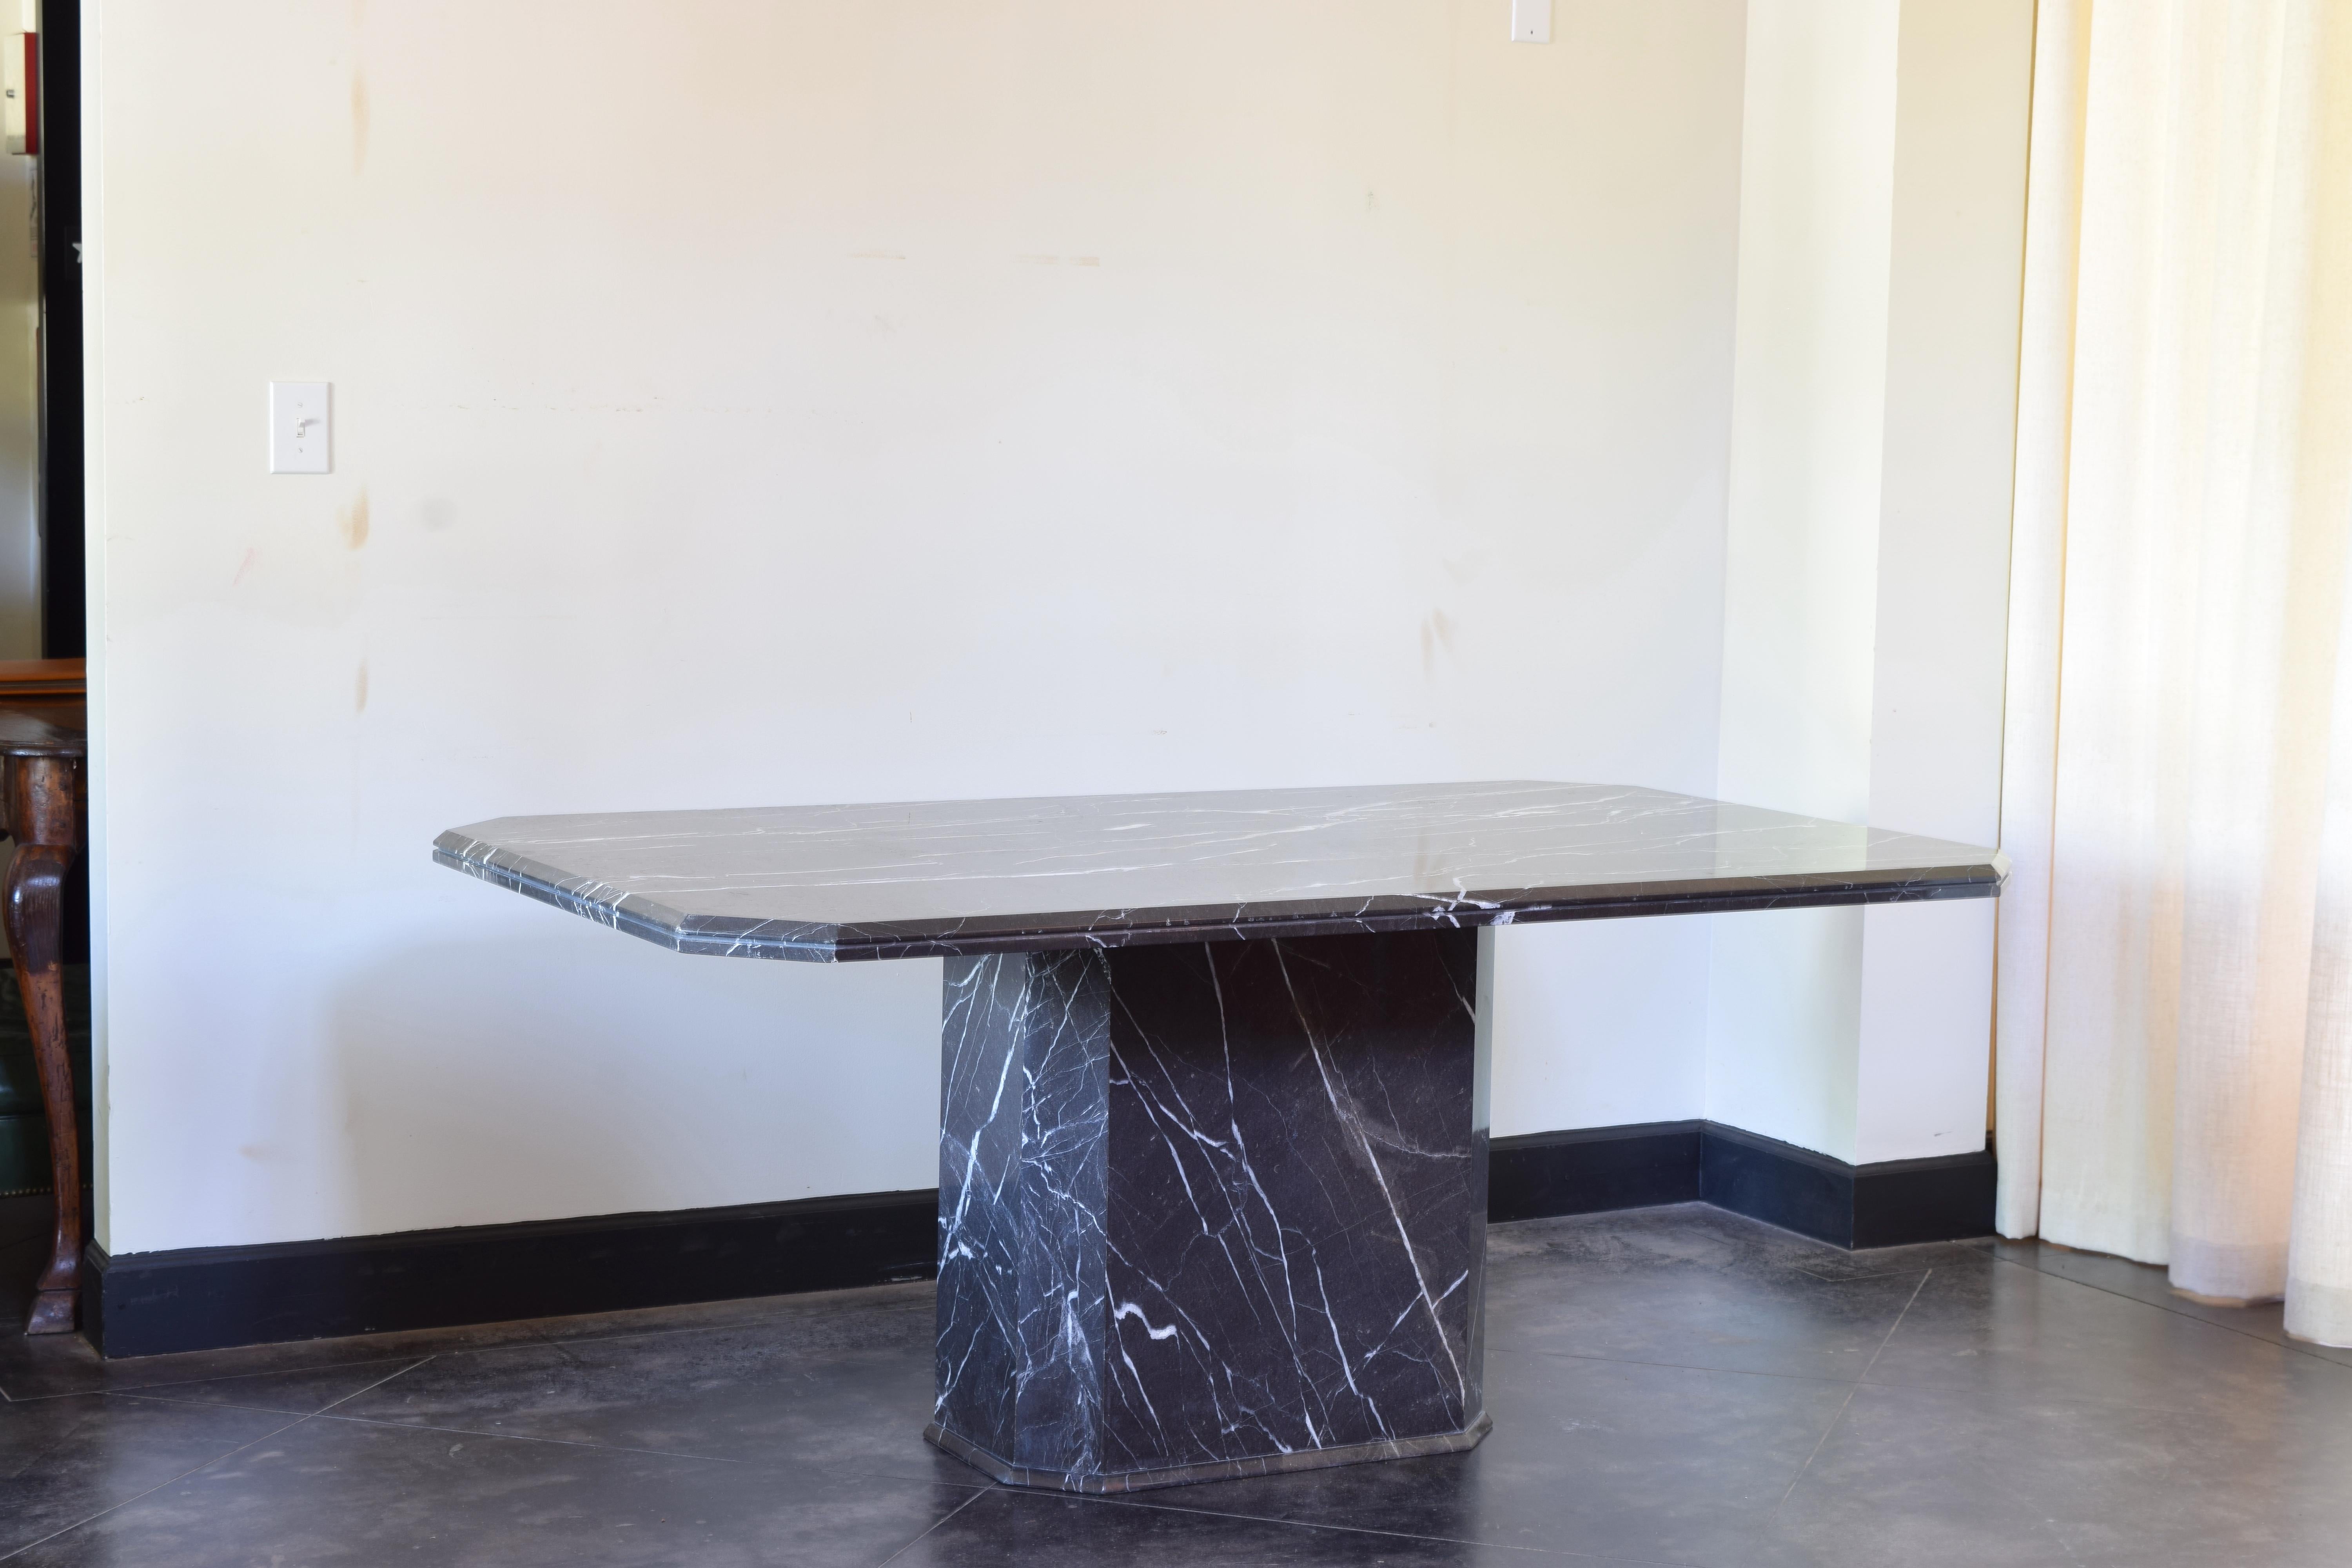 The top a single slab of marble of rectangular shape with canted corners resting atop a central elongated octagonal pedestal with molded edge at base